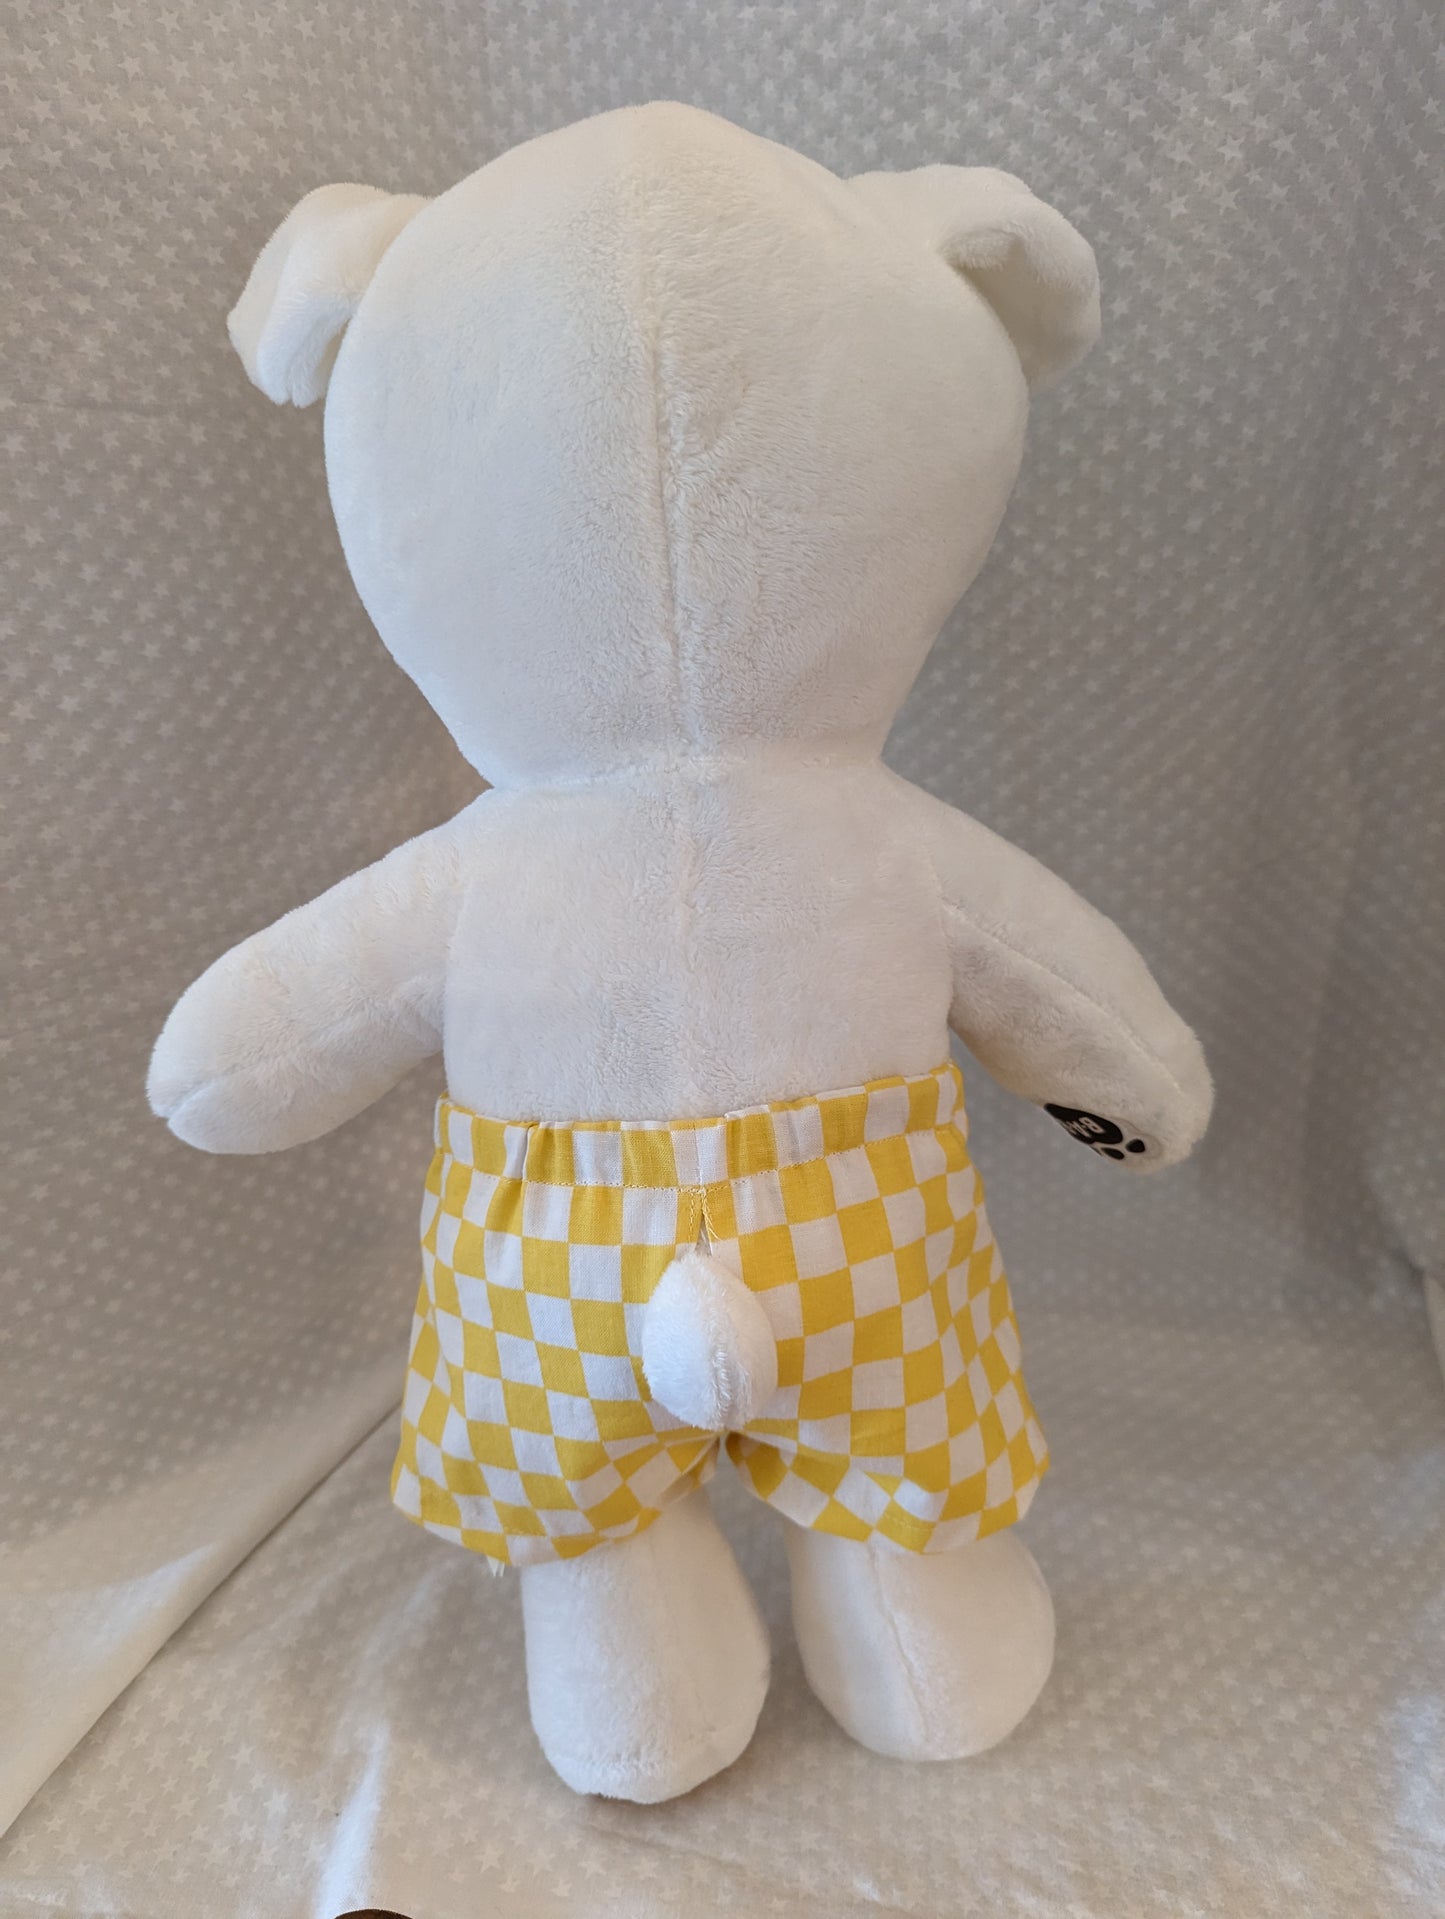 Checkerboard shorts and kerchief set - for punk rock plushies and build-a-bears